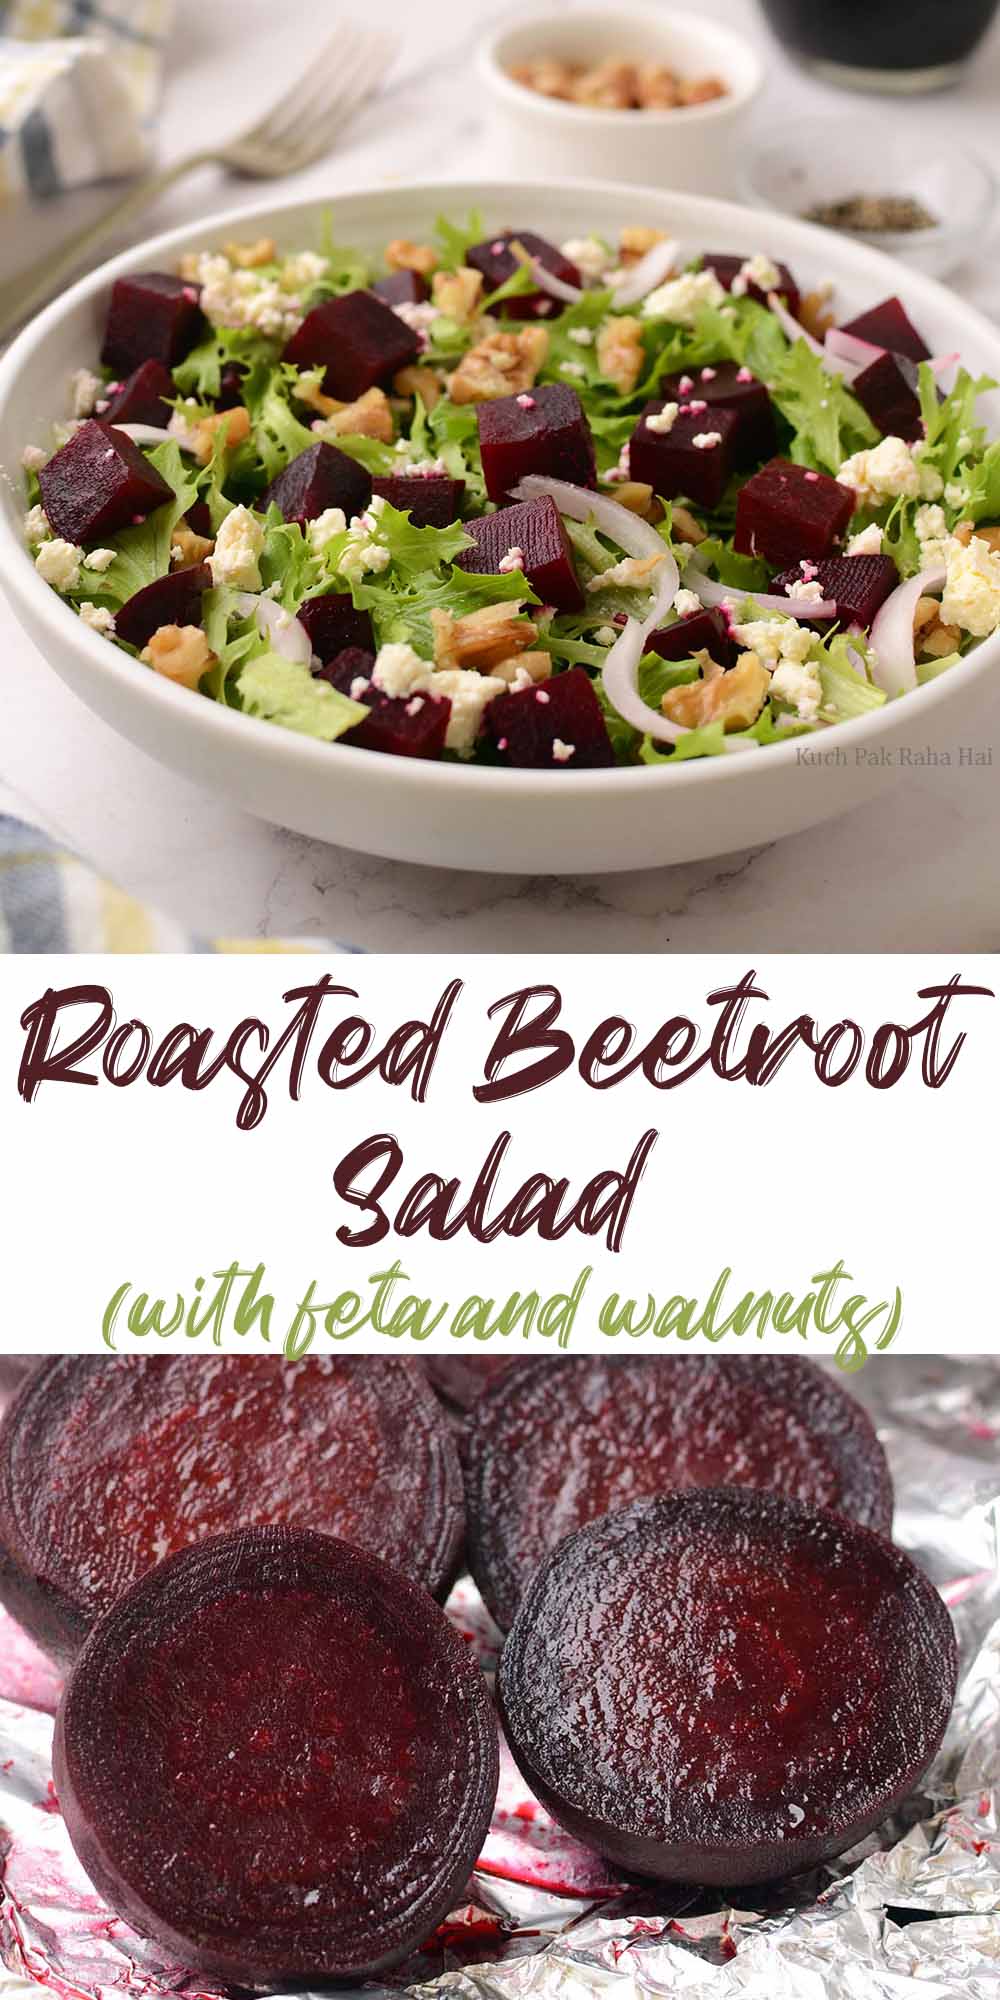 Roasted Beetroot Salad with walnuts feta cheese lettuce